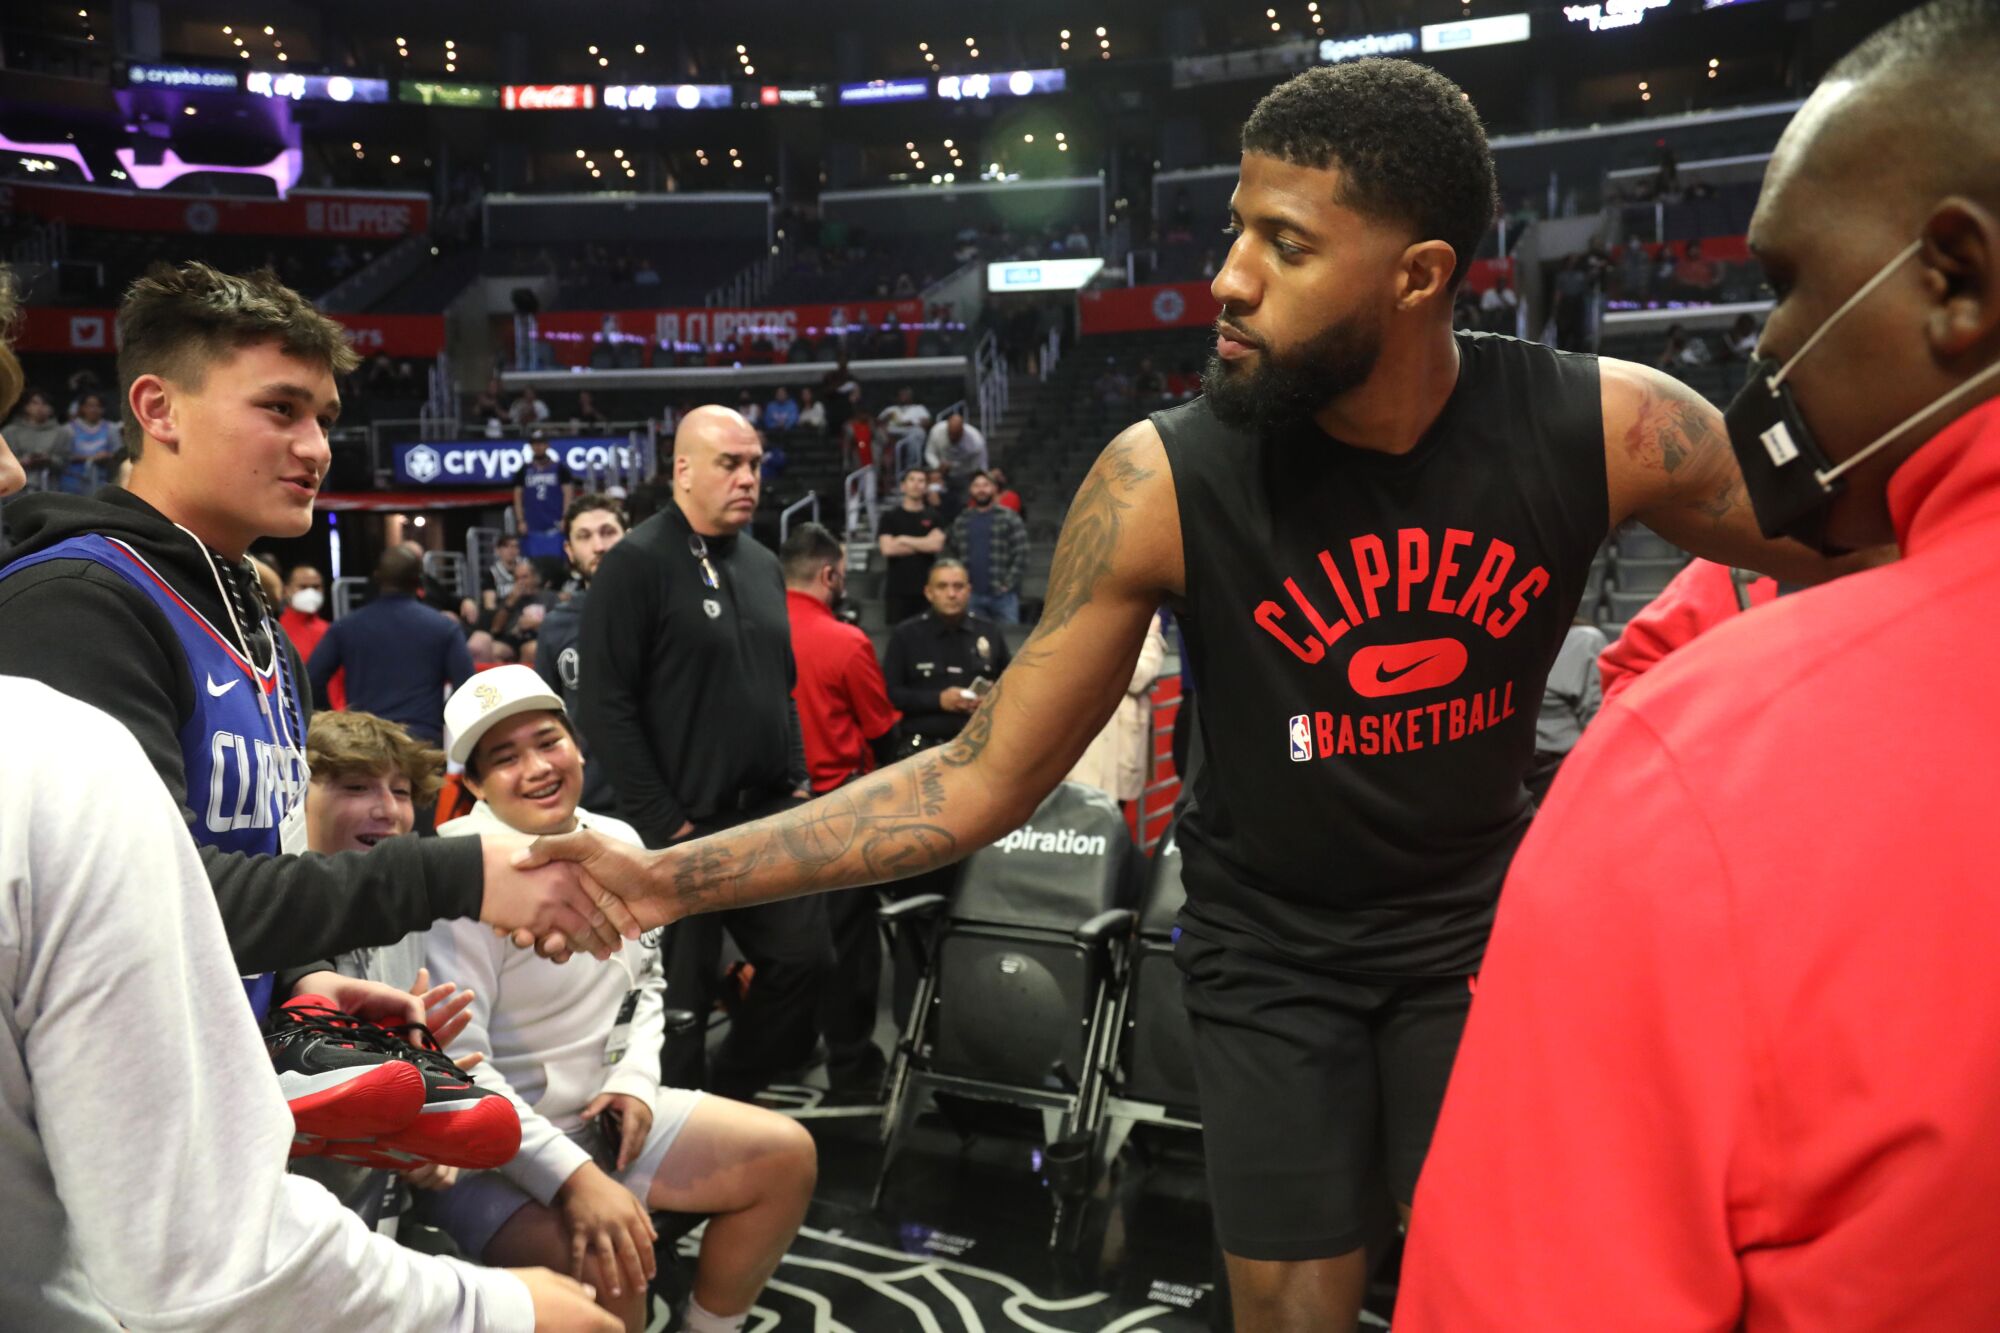 Clippers forward Paul George greets a fan courtside before a game.